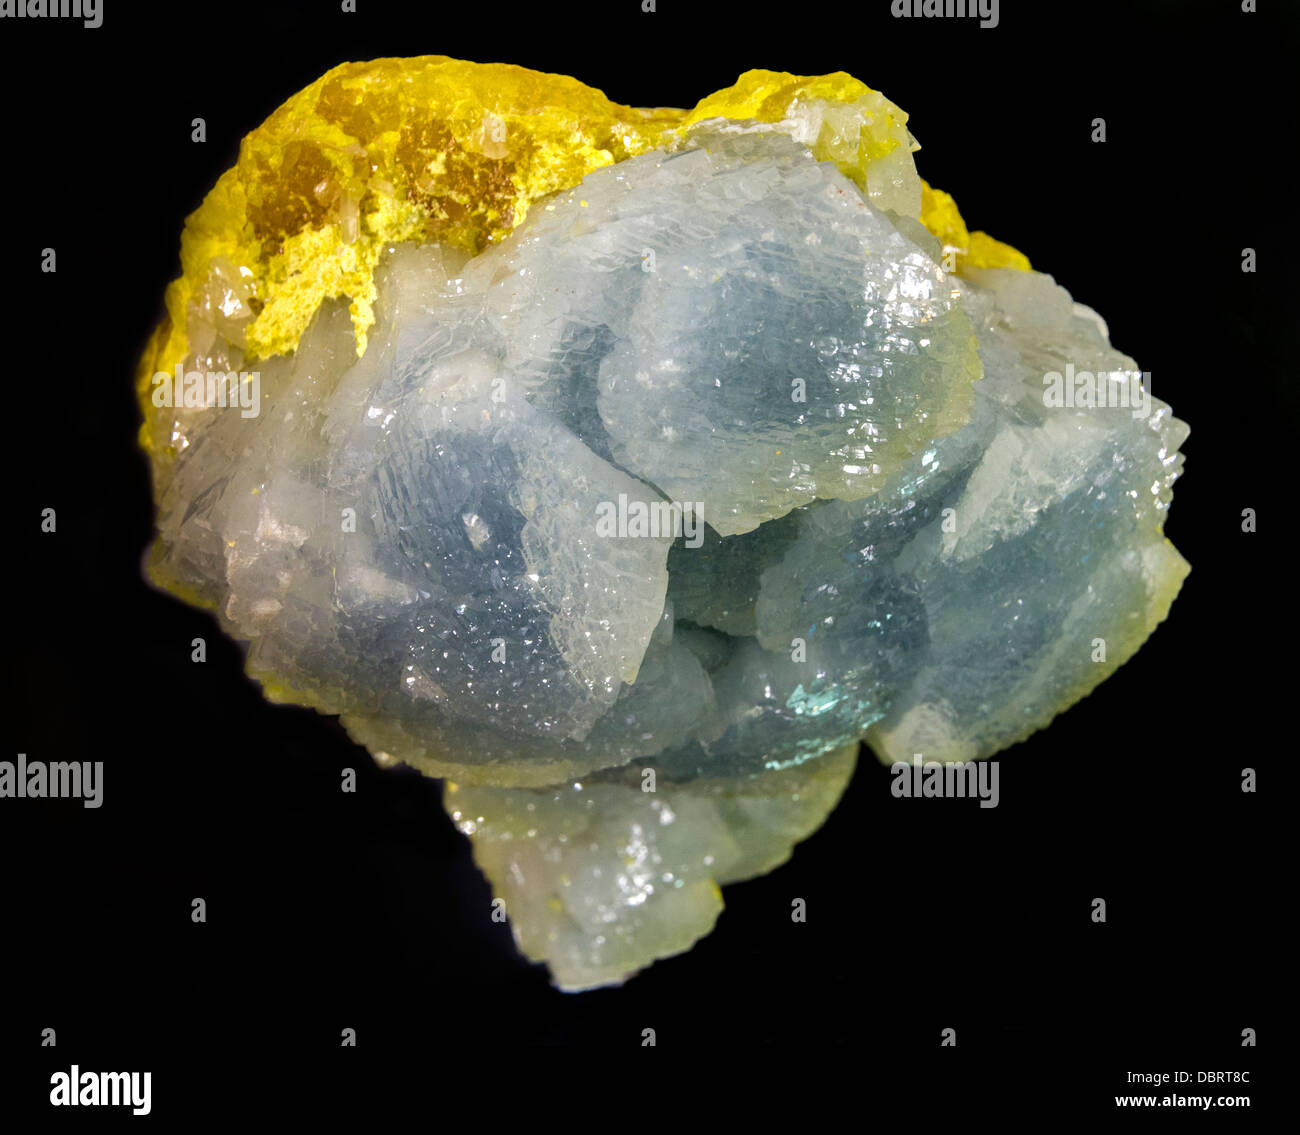 Fantastic crystal of Sulfur and Celestine mineral sample Stock Photo